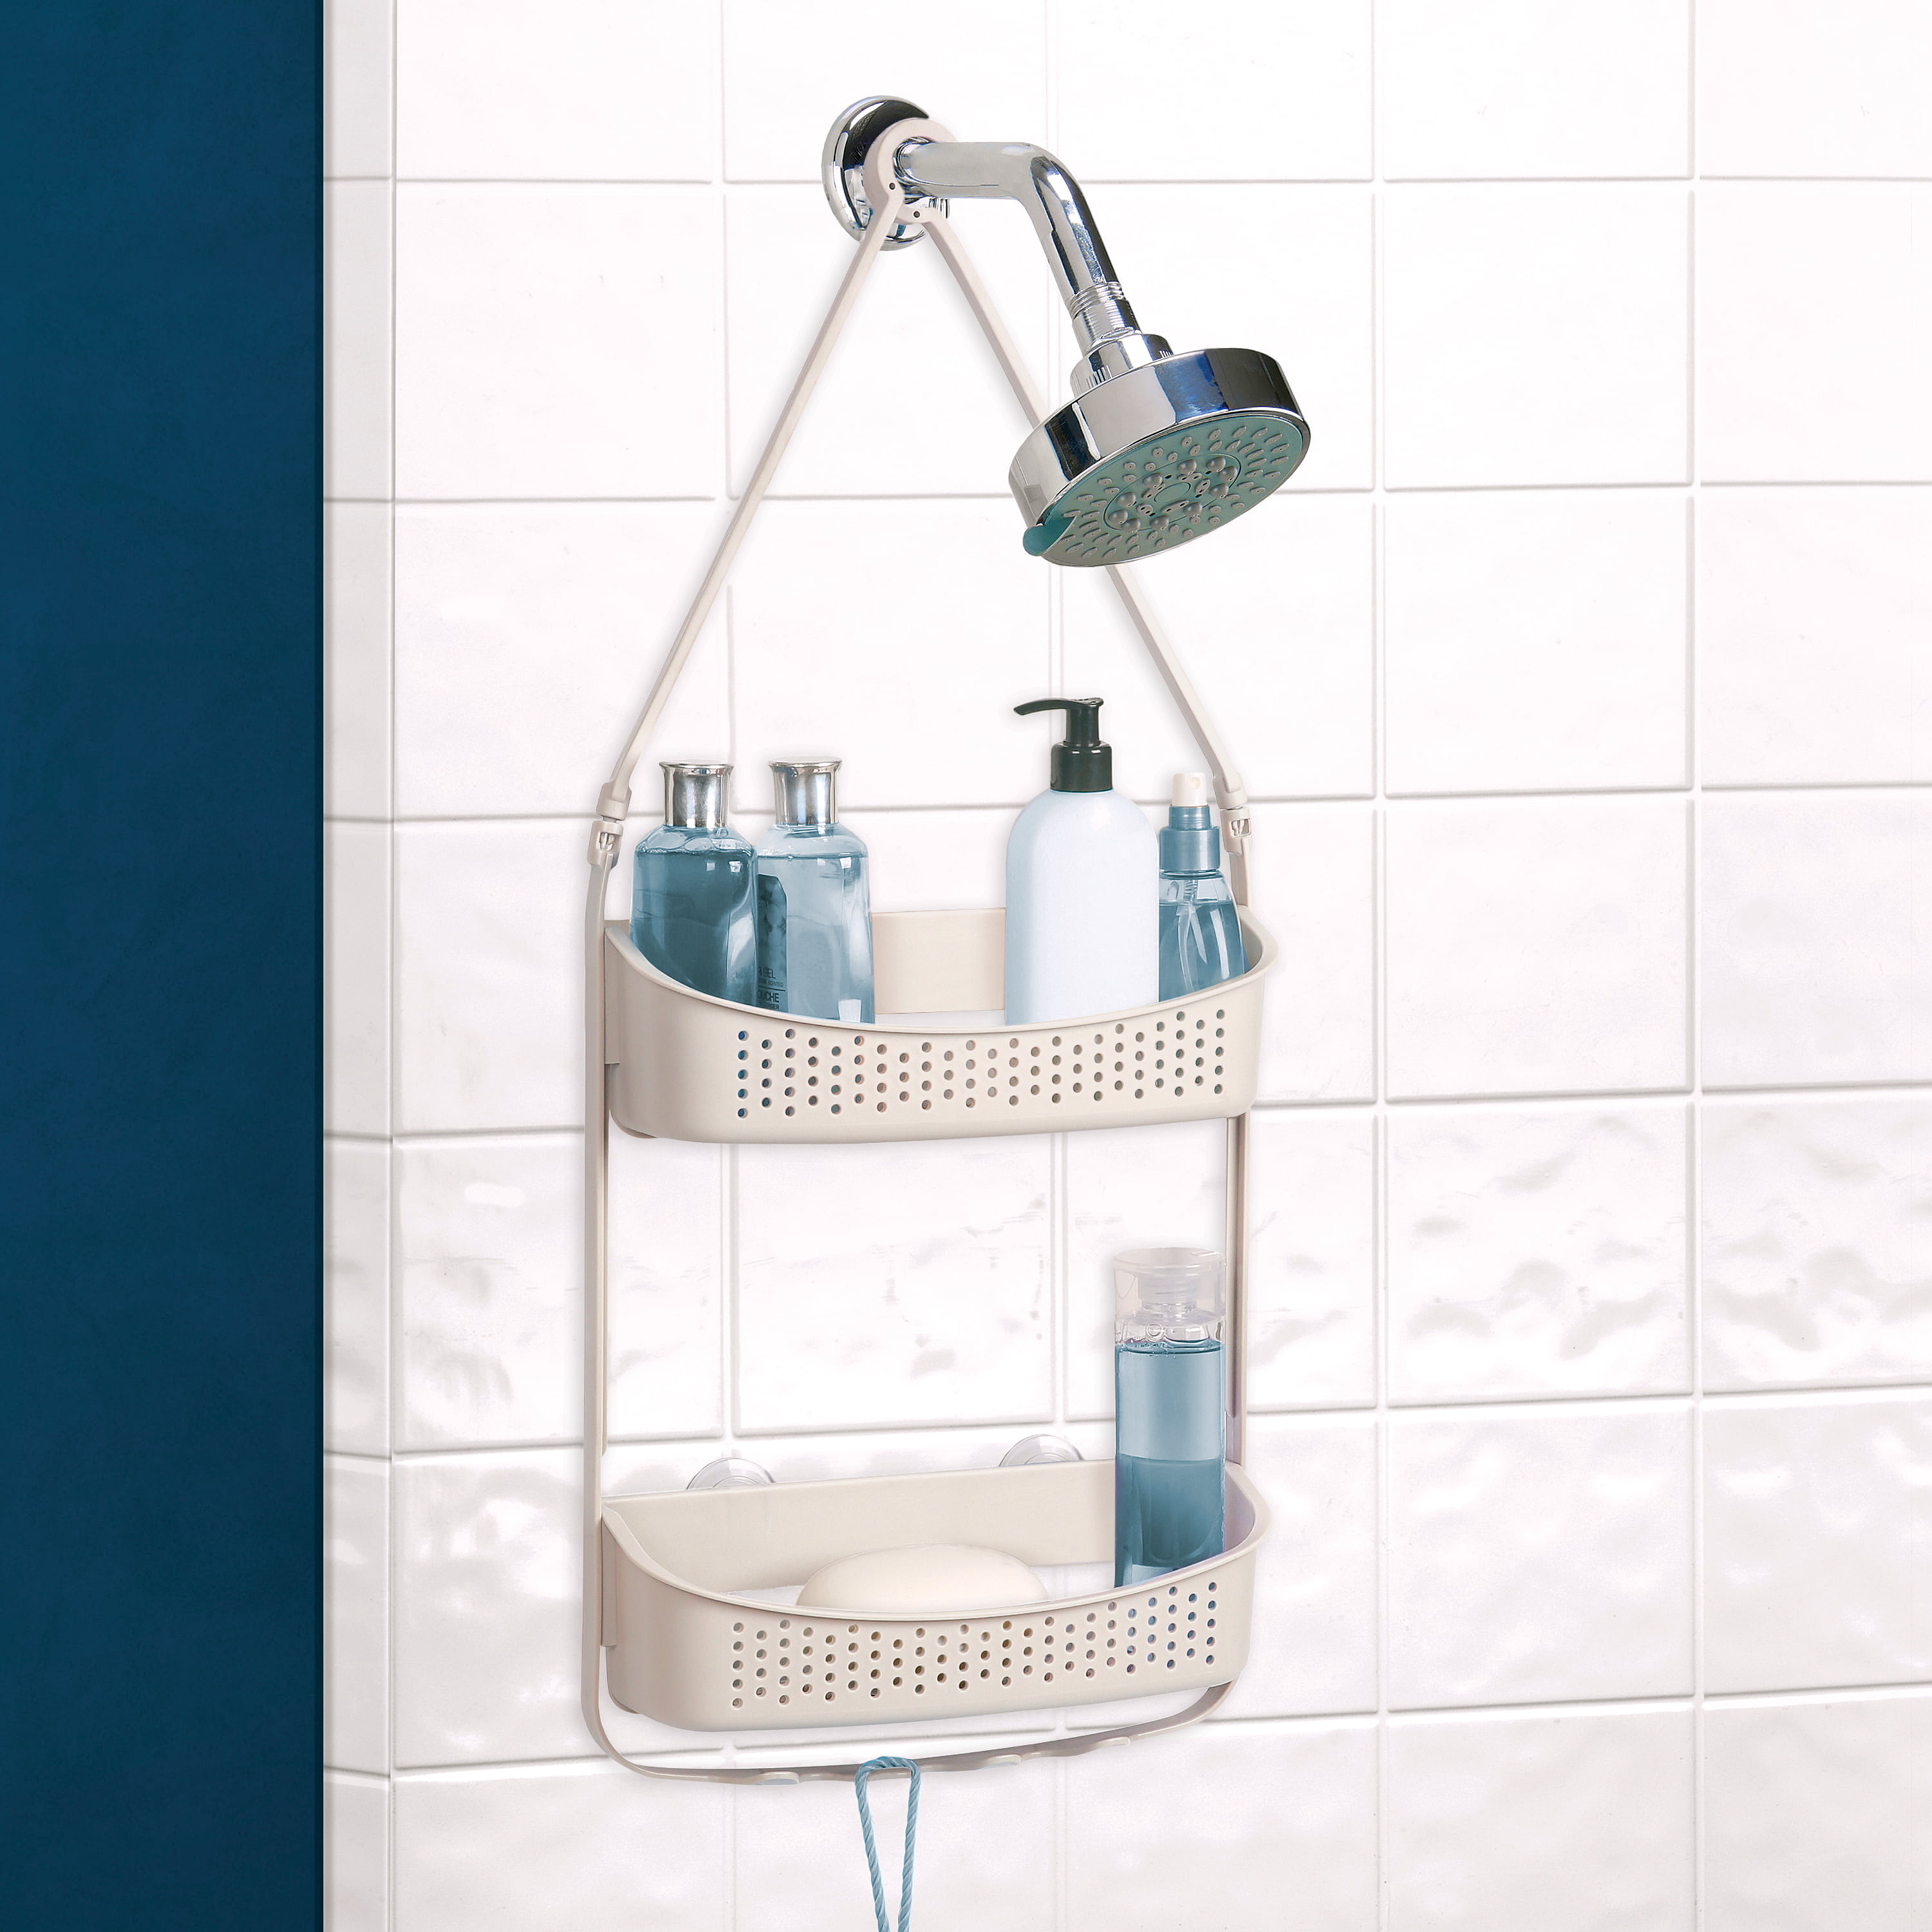 Bath Bliss Multi Hanging Option Shower Caddy in White 28523-WHITE